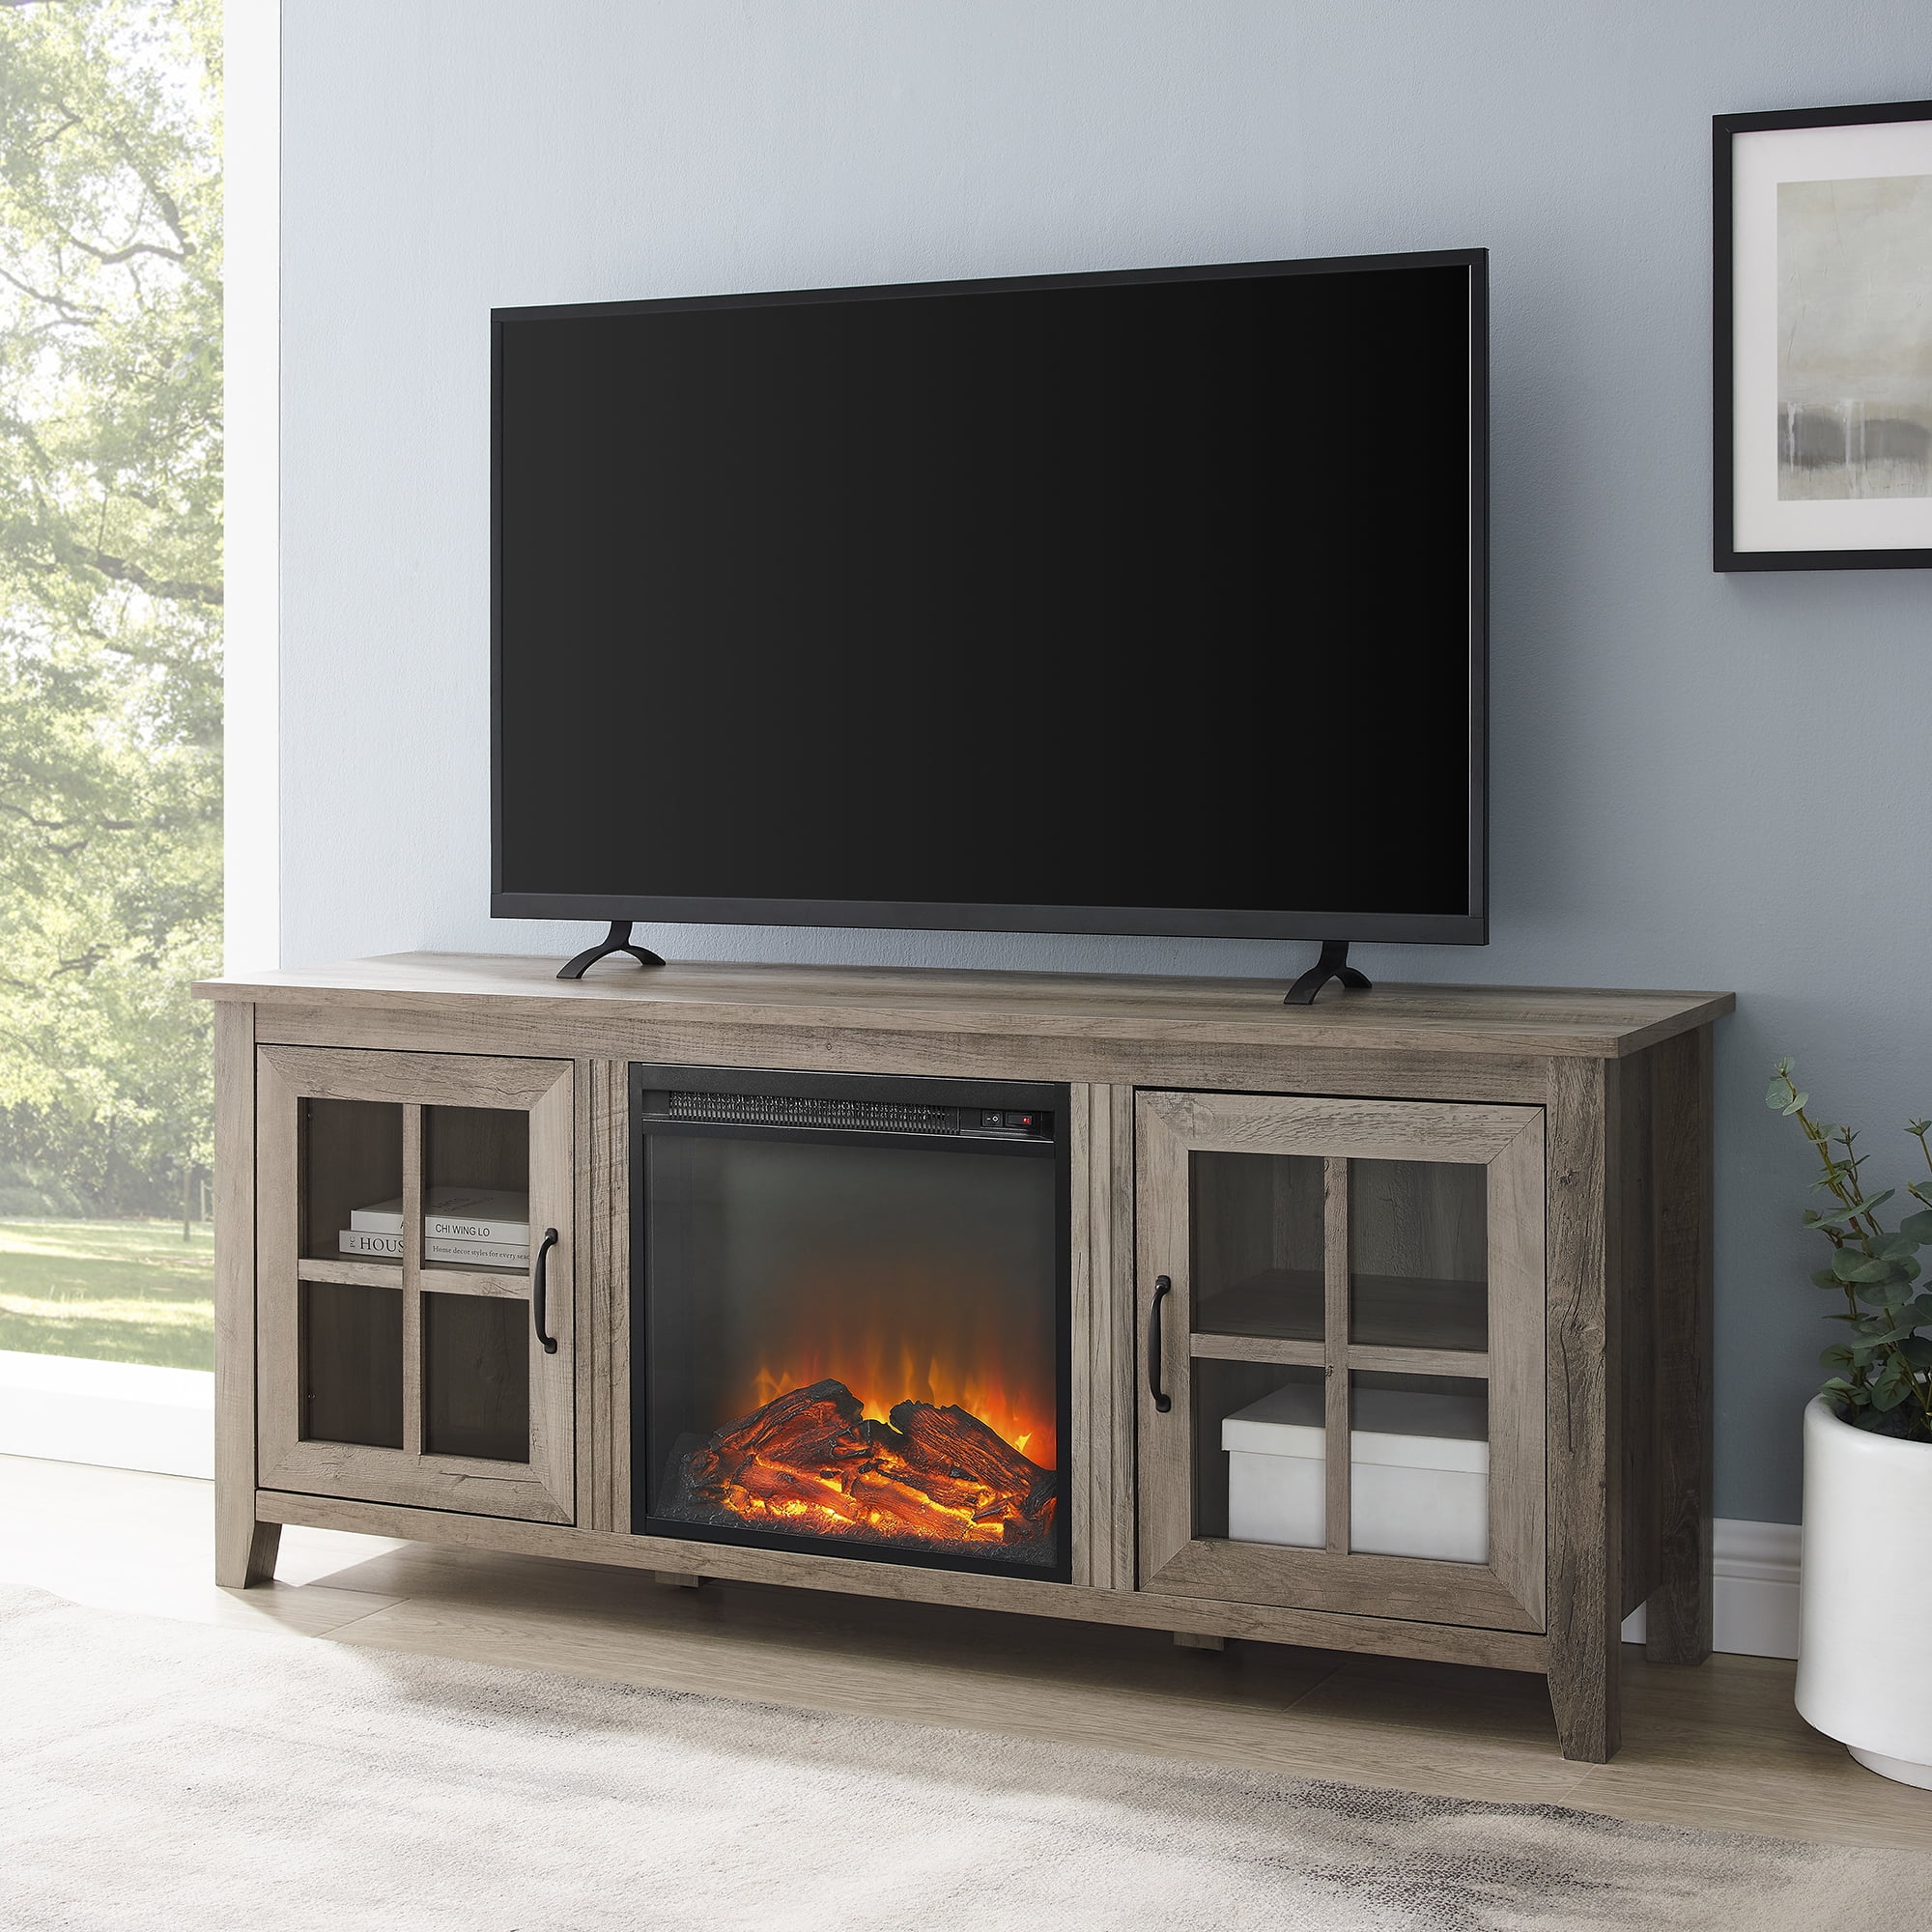 Manor Park Traditional Glass-Door Fireplace TV Stand for TVs up to 65", Grey Wash - Walmart.com